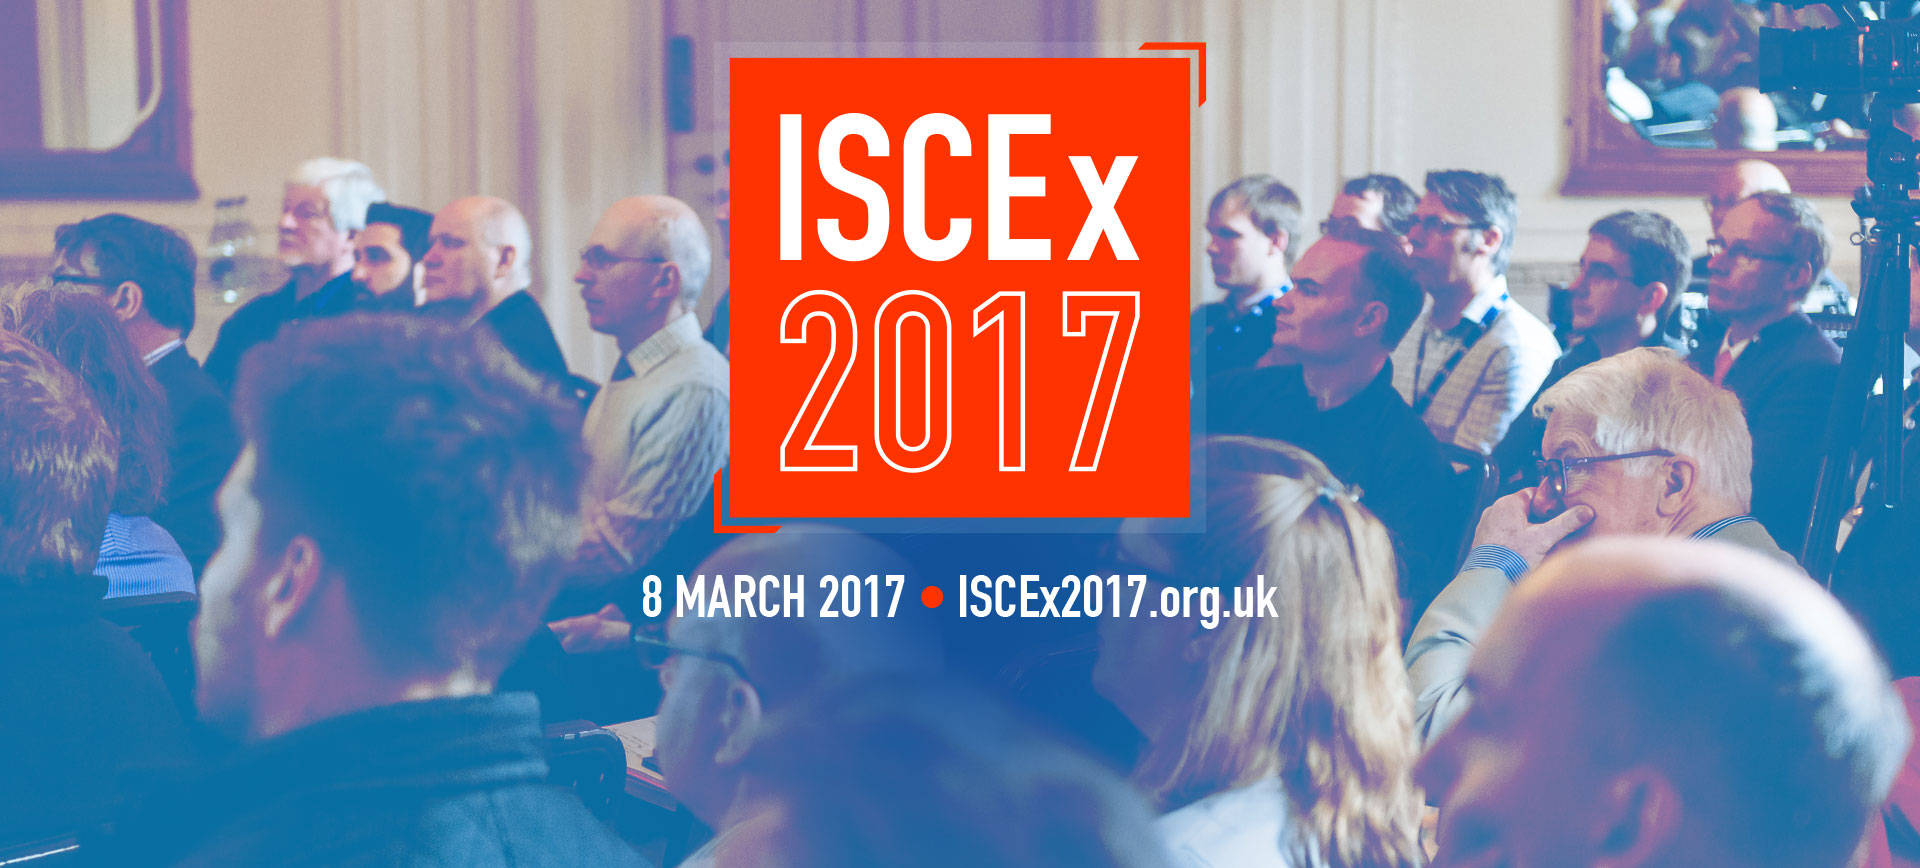 Cloud at ISCEx 2017 - 8th March 2017